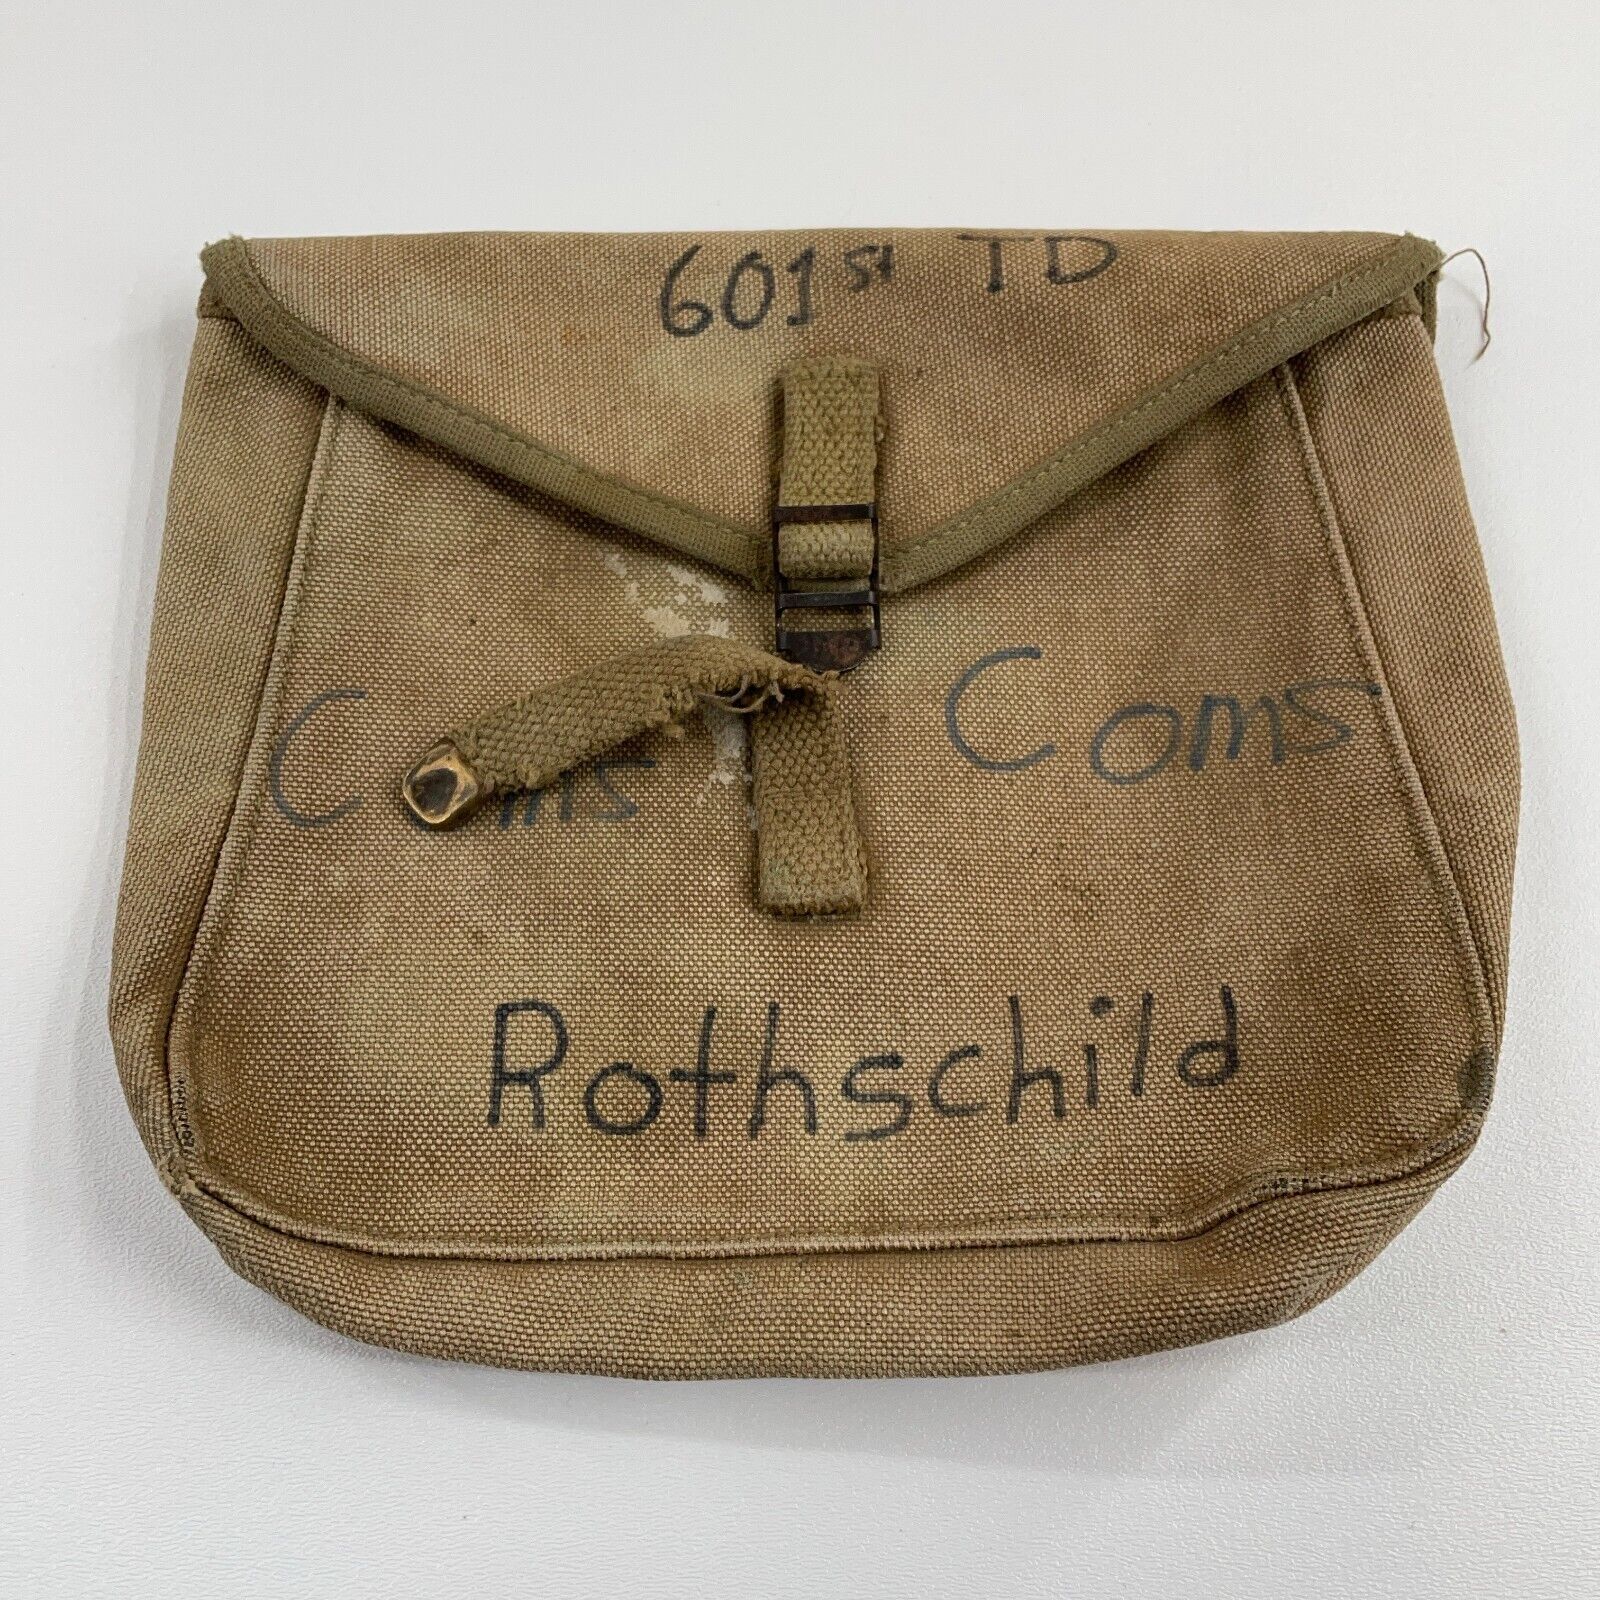 WW2 WWII US Military Canvas Hanging Bag Pouch 9x7x2 Musette 601st TD Rothschild